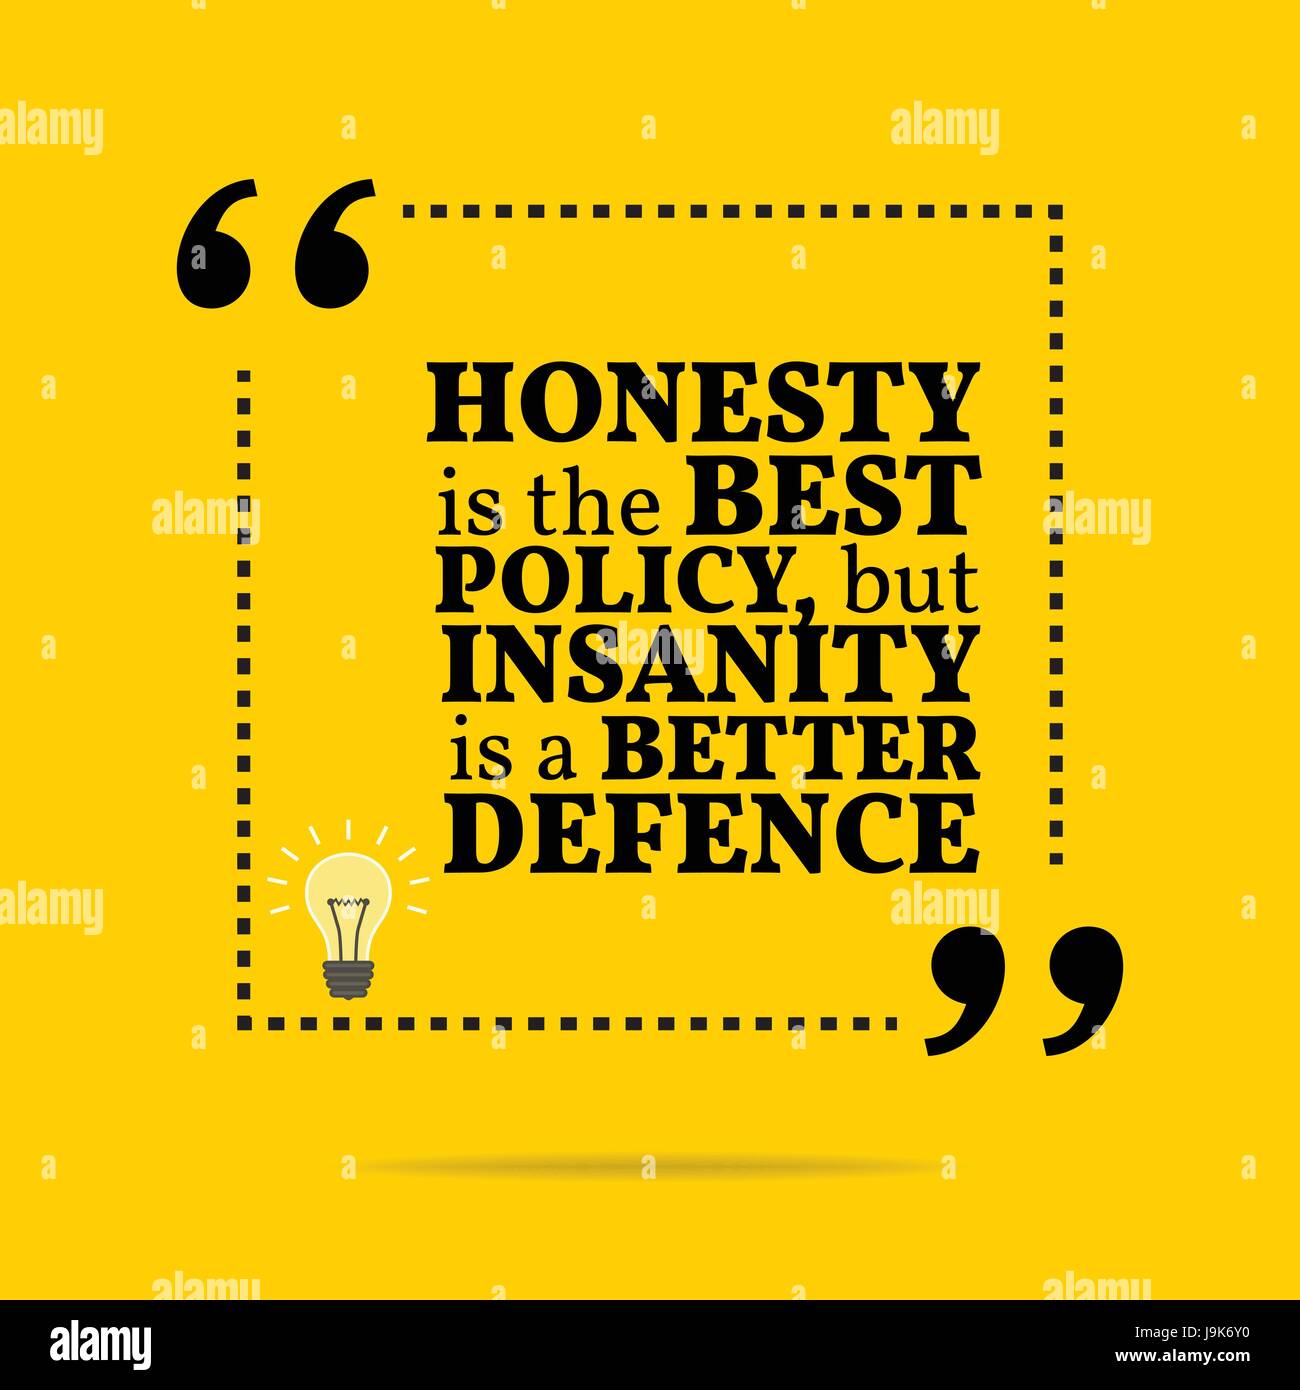 honesty is the best policy poster